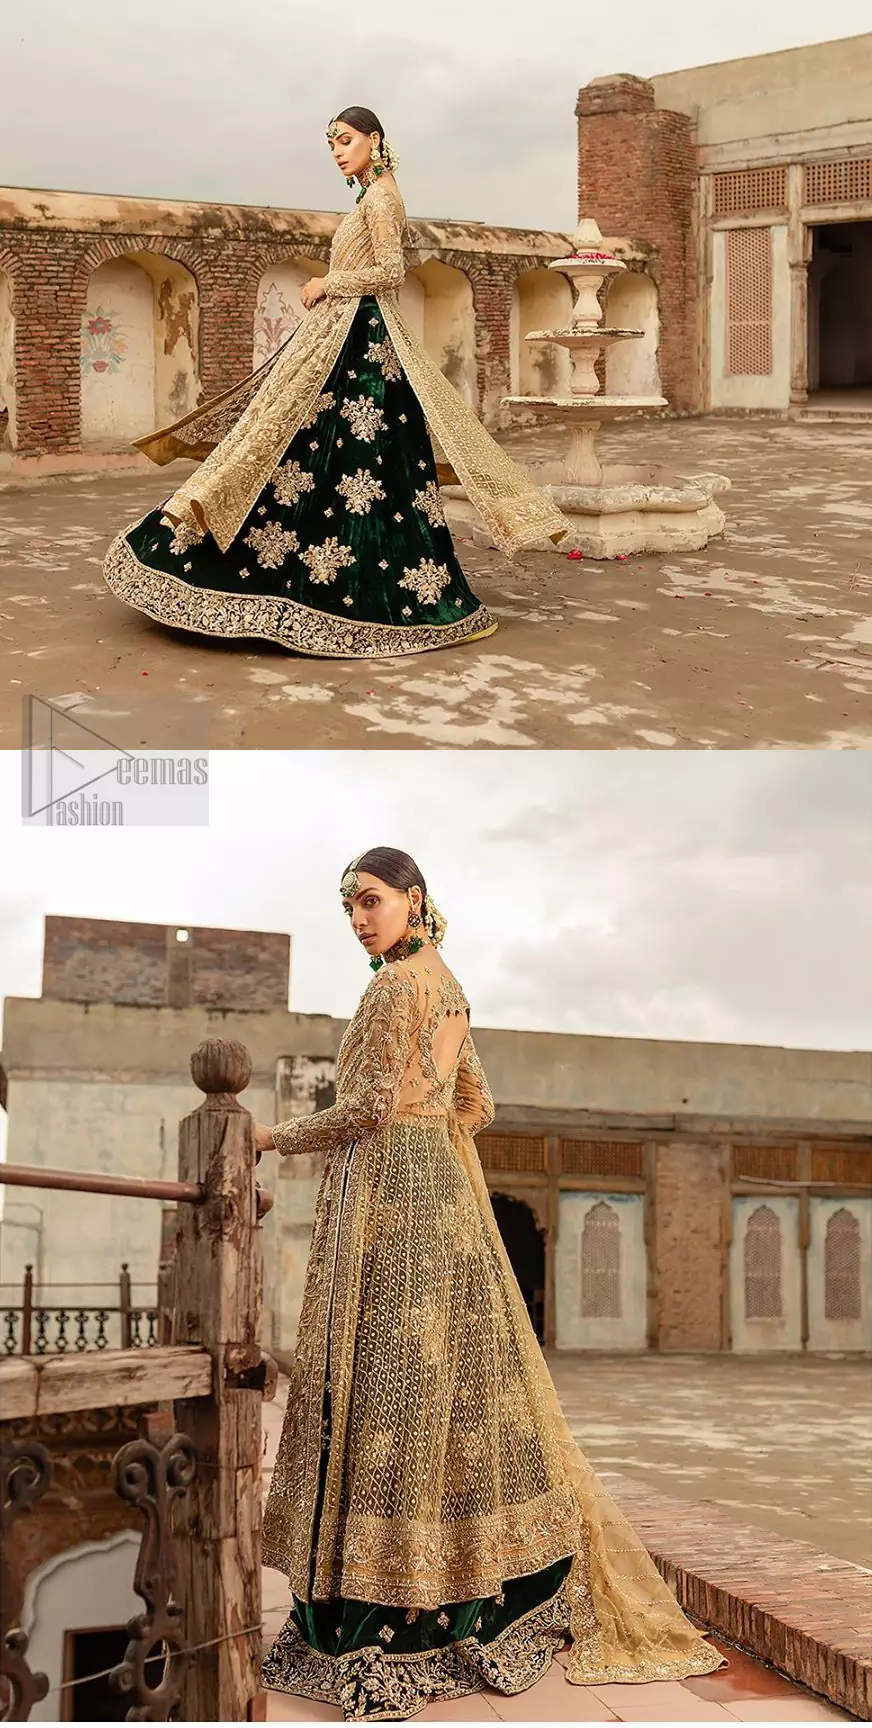 The new season is all about making a statement. Make your moment memorable being a queen in our fawn front open pishwas intensified with voguish sleeves, floral pattern all over and finished with thick embroidered border. The back of the shirt is also enhanced with criss cross patterns filling with beads. Pair it up with bottle green velvet lehenga emphasized with scattered floral motifs and intricate zardozi detailing at the bottom. Dupatta is decorated with vintage froral and finished with embroidered scalloped border on four sides which makes this outfit more beautiful.